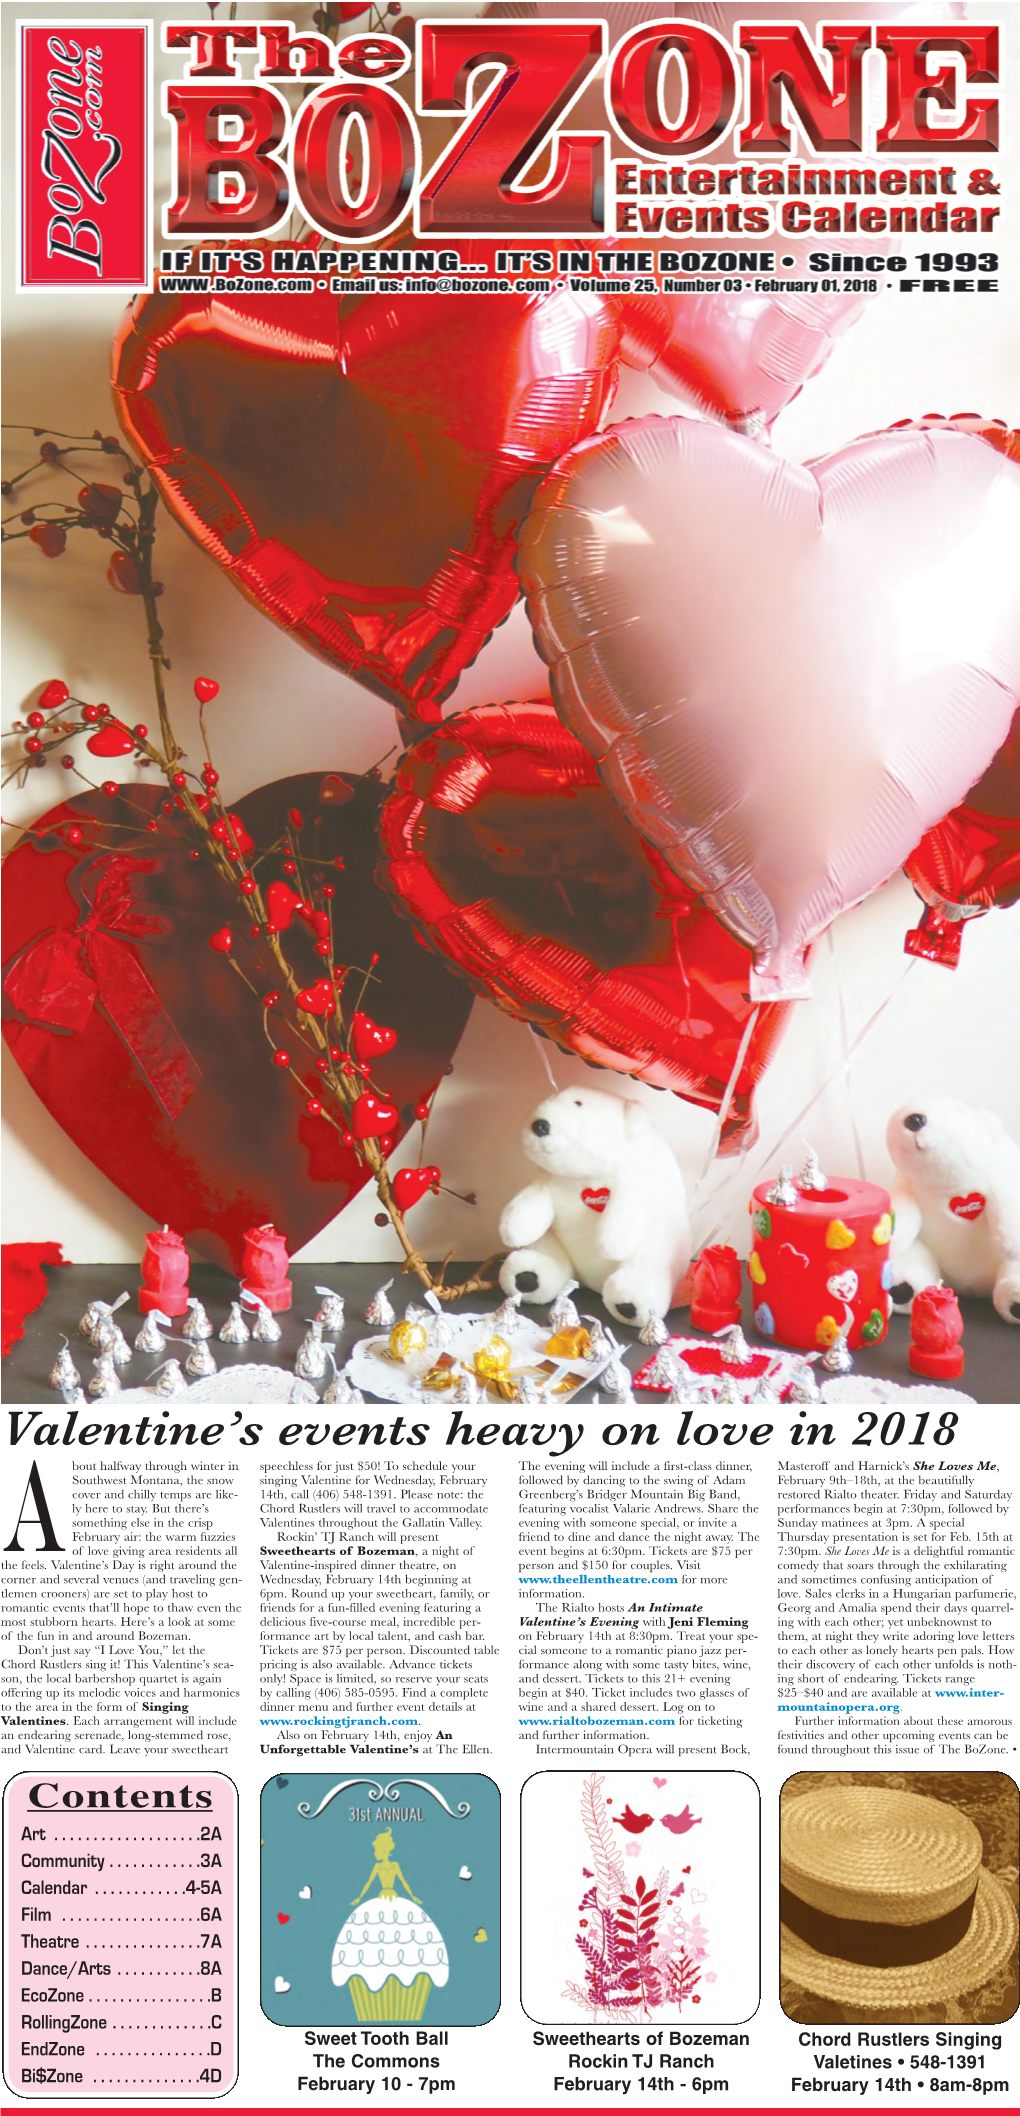 Avalentine's Events Heavy on Love in 2018